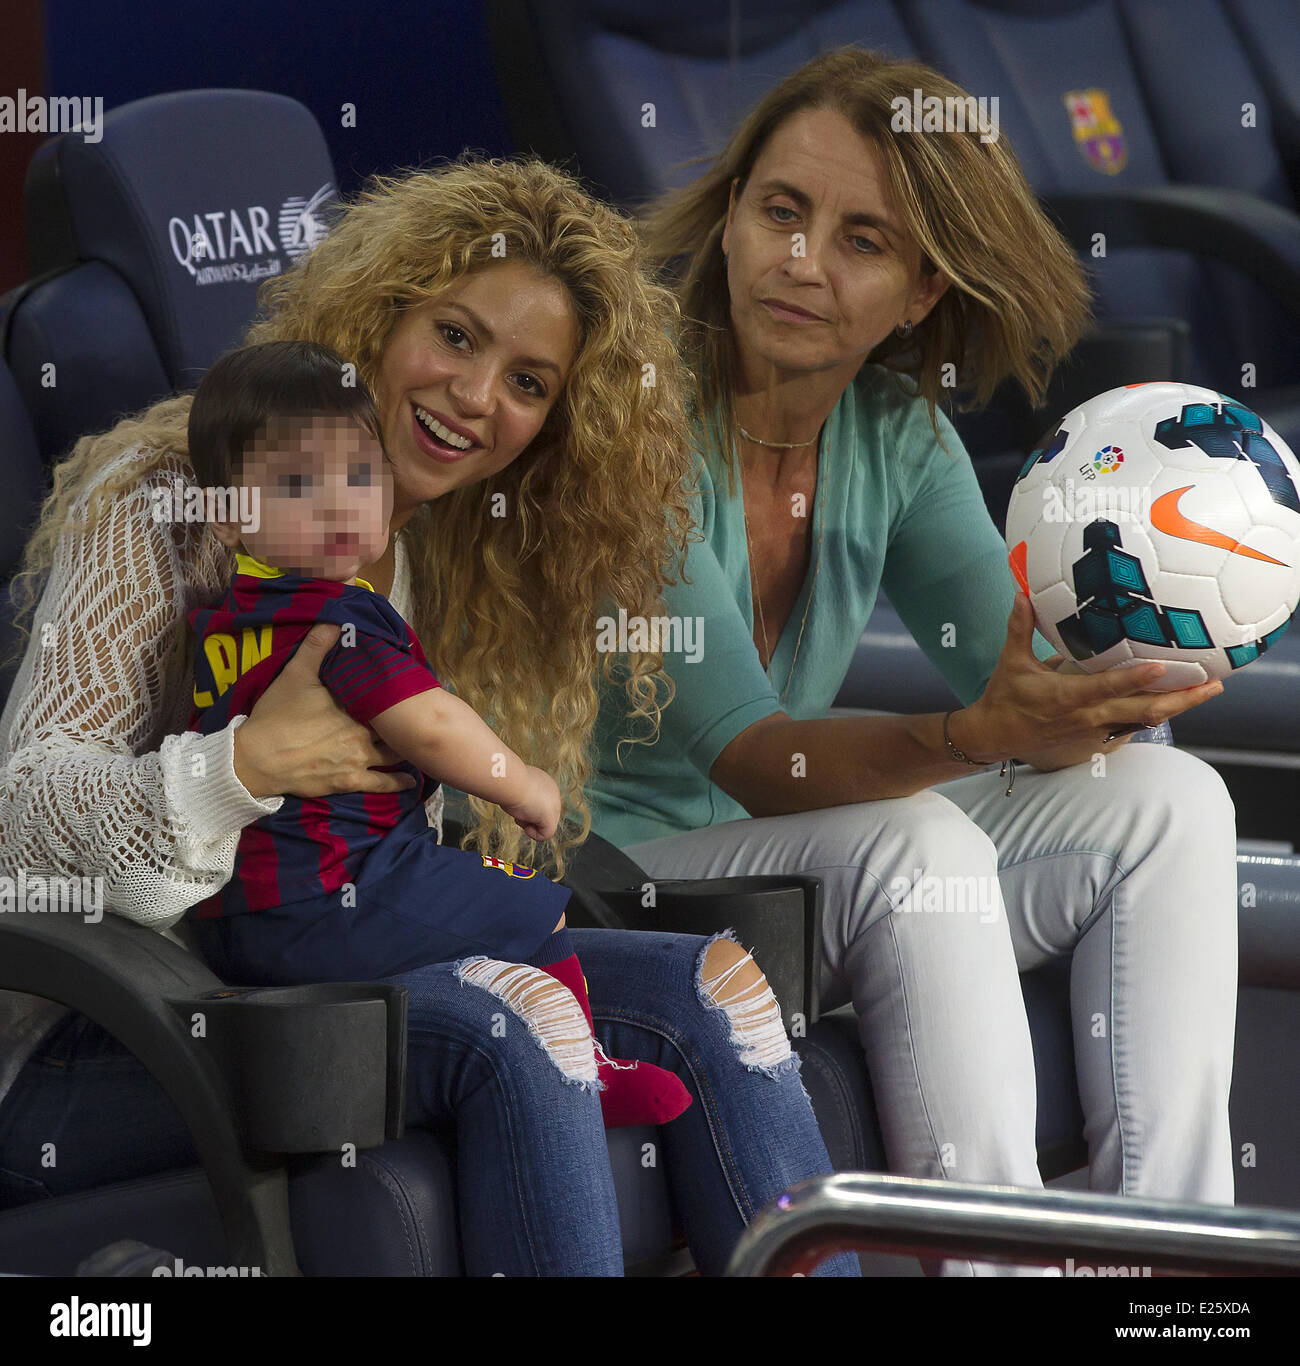 Shakira, along with her baby son and mother-in-law, watch her partner Gerard Pique in an FC Barcelona football match against Sevilla FC  Featuring: Shakira,Milan Pique Mebarak,Montserrat Bernabeu Where: Barcelona, Spain When: 14 Sep 2013 Stock Photo